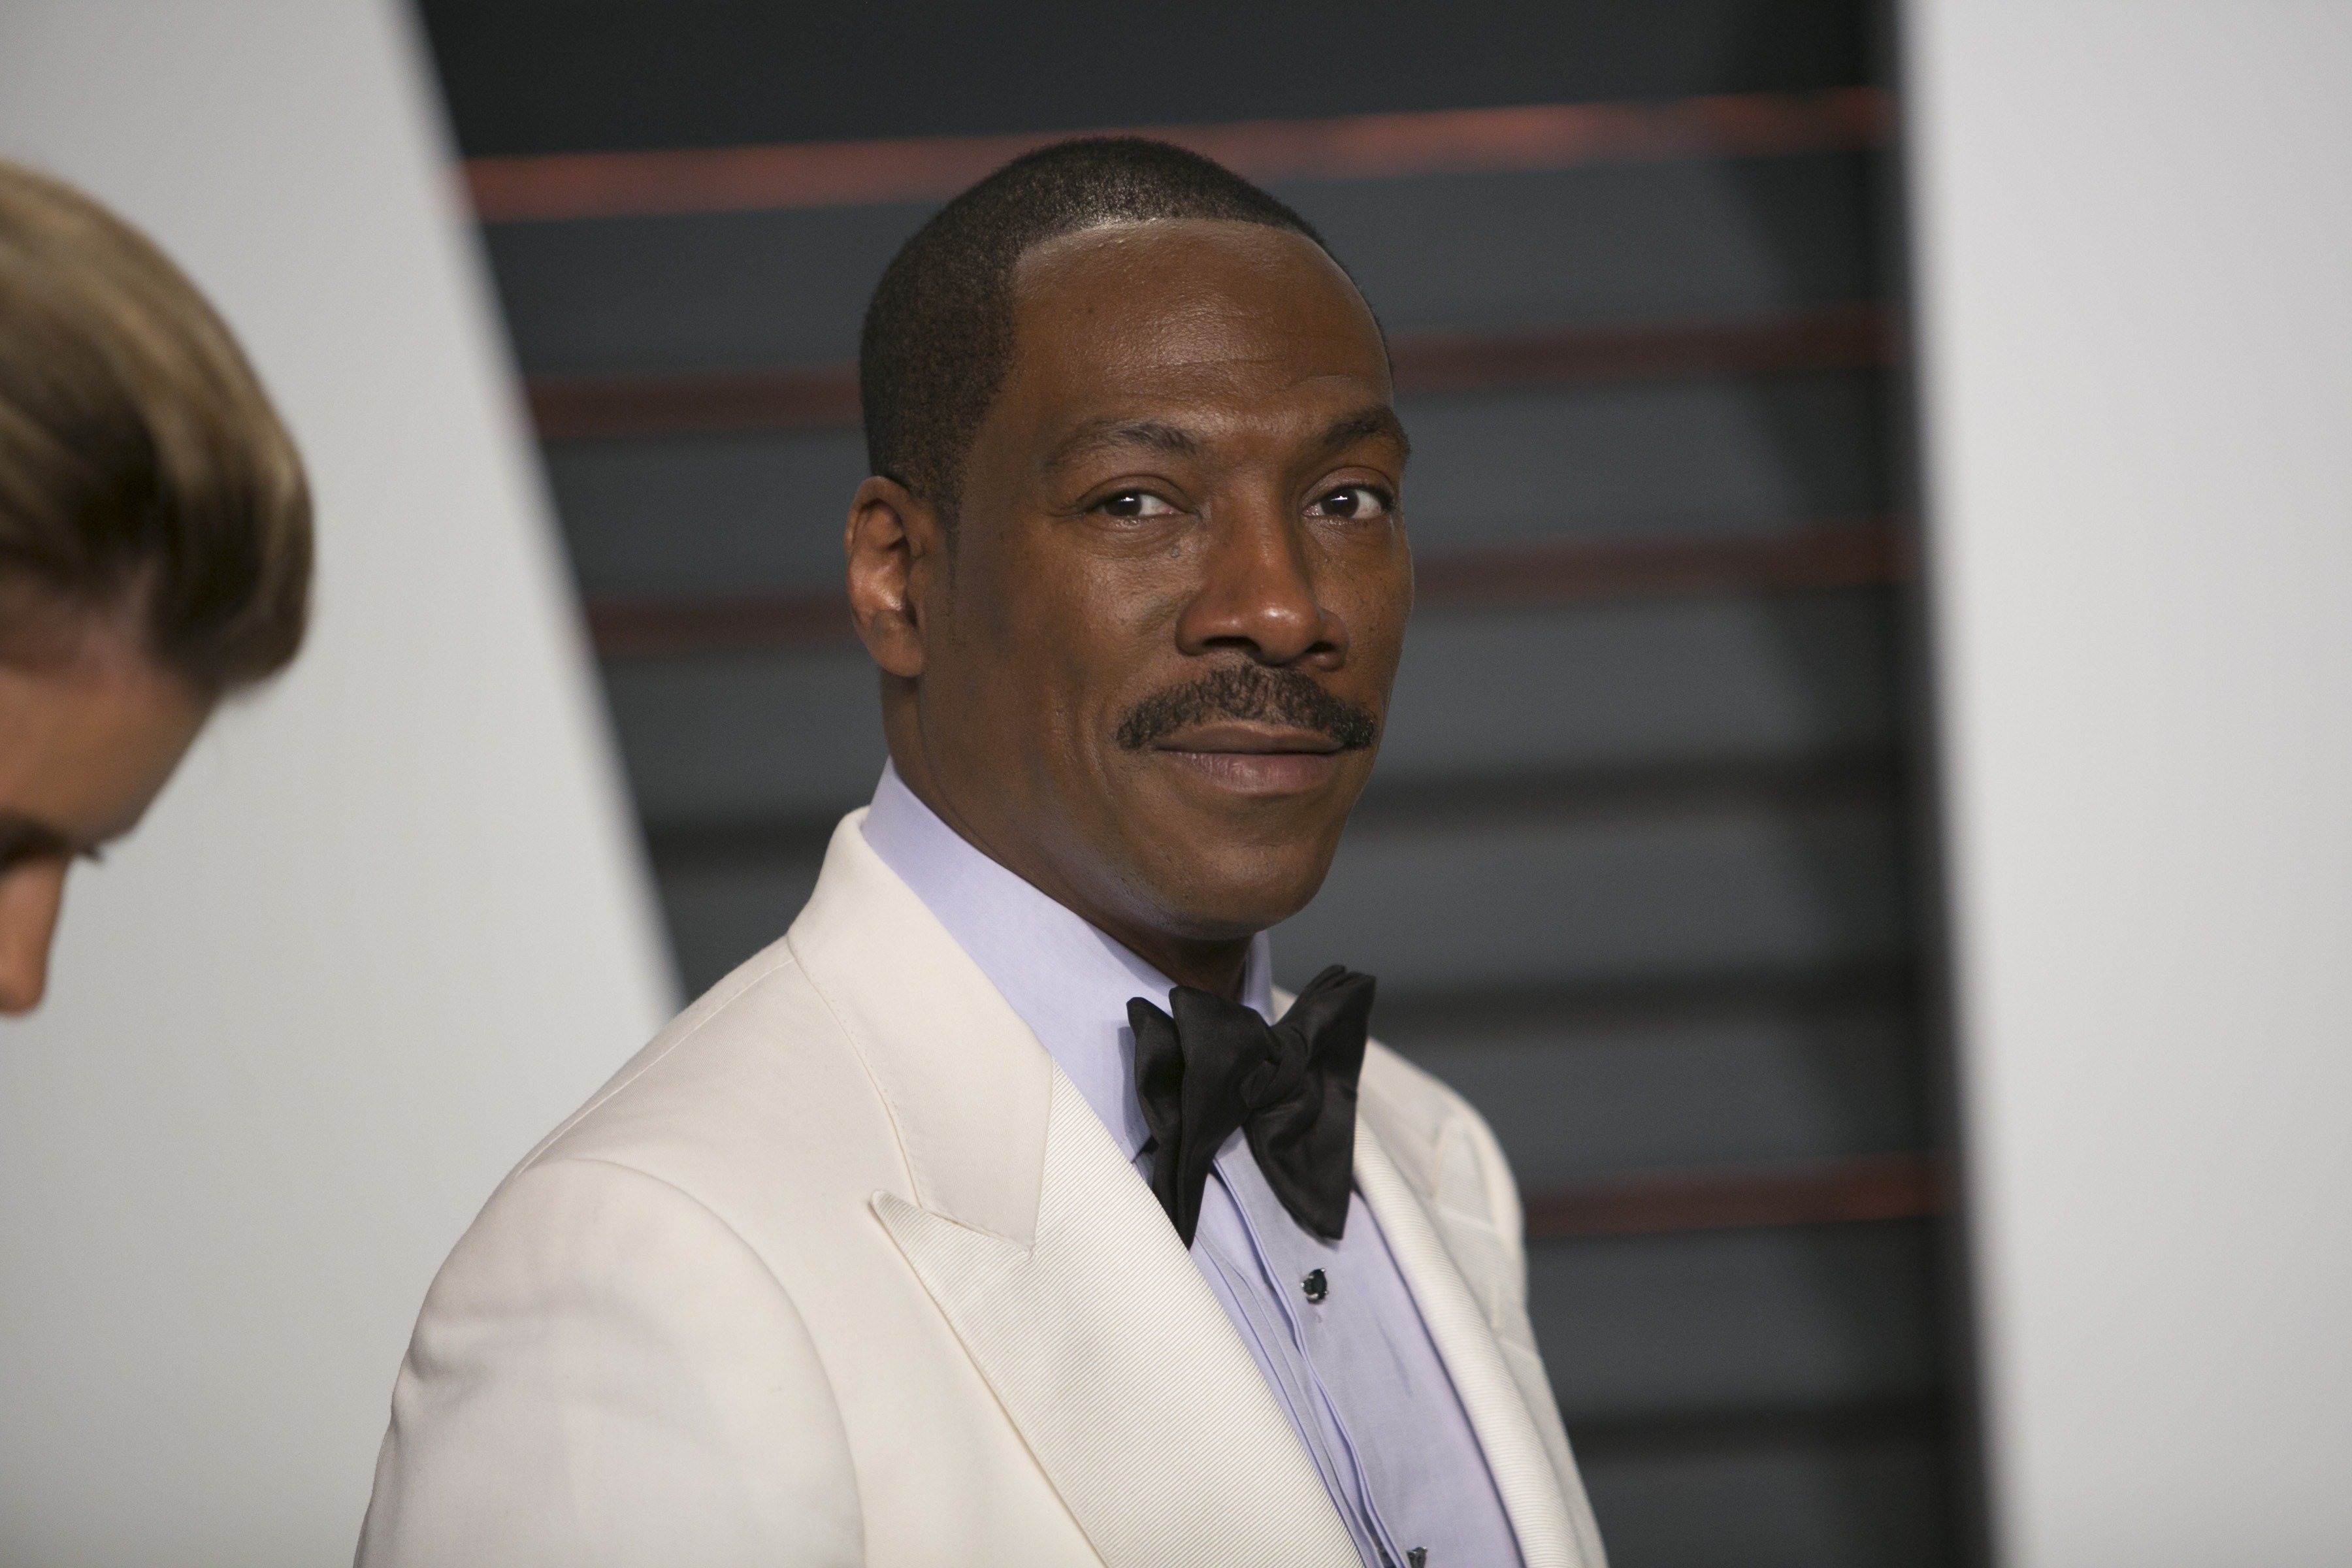 Eddie Murphy posing at the  2015 Vanity Fair Oscar Party on February 22, 2015 in Beverly Hills, California. | Source: Getty Images